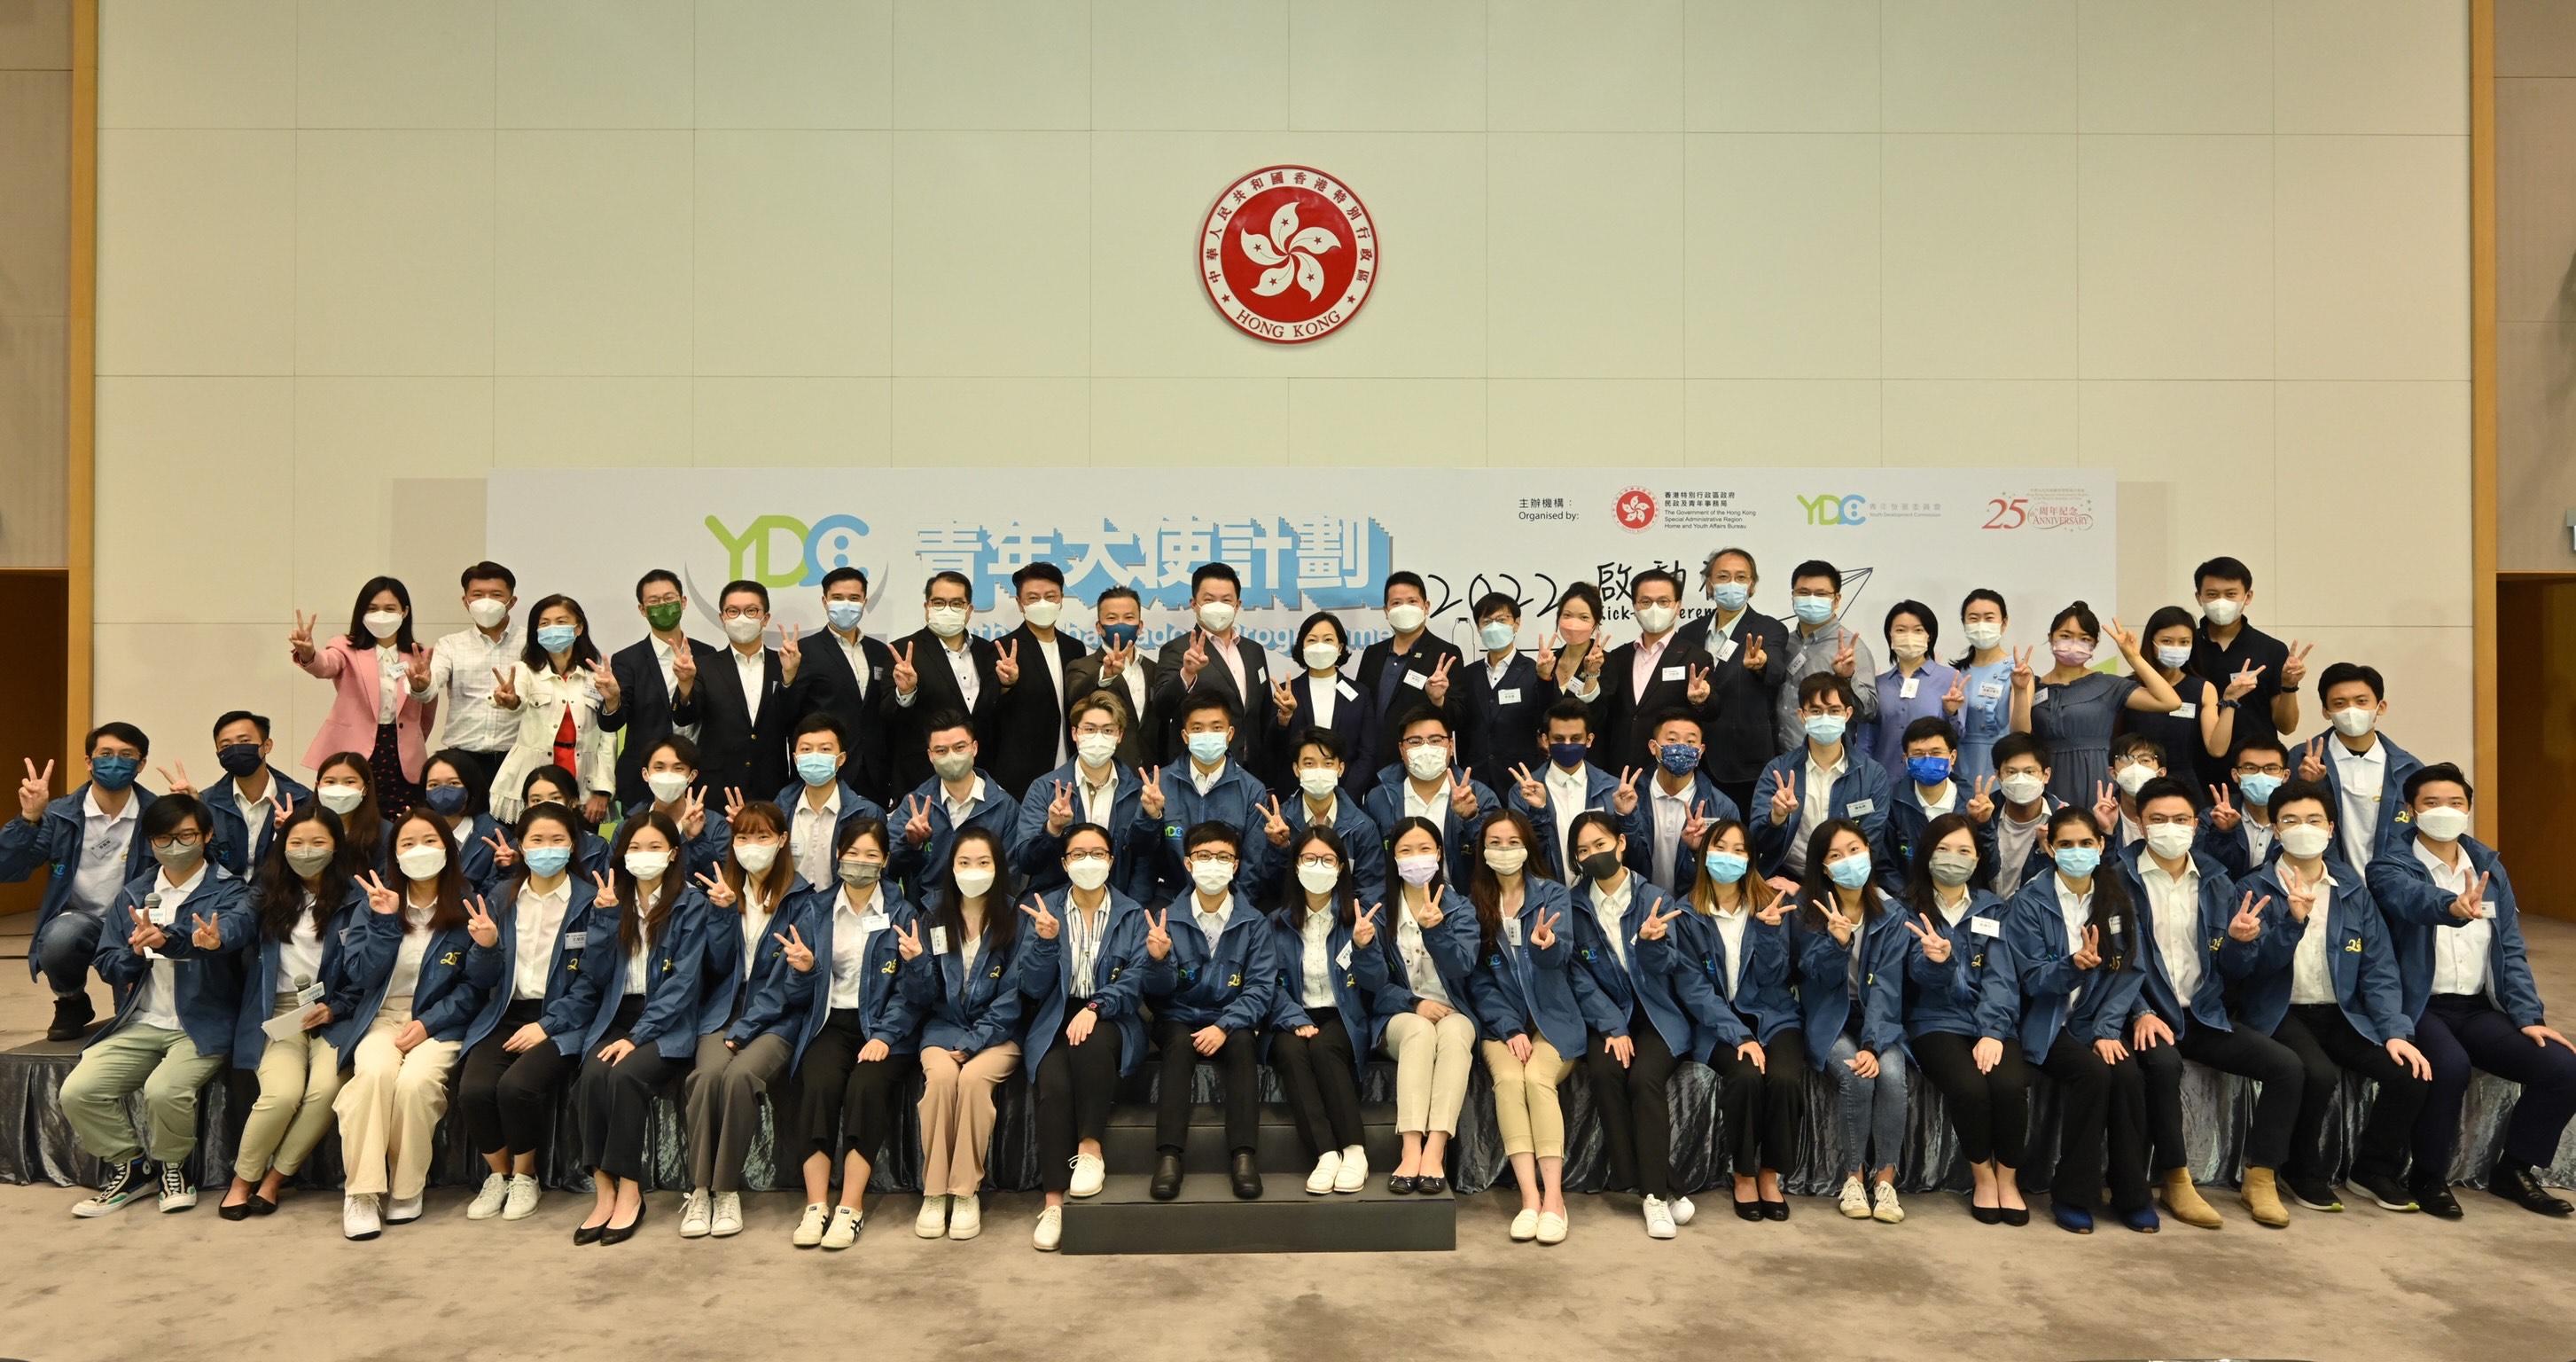 The Secretary for Home and Youth Affairs, Miss Alice Mak, attended the kick-off ceremony of the YDC Youth Ambassadors Programme 2022 today (August 27). Photo shows Miss Mak (third row, eleventh left) and the Vice-Chairman of the Youth Development Commission (YDC), Mr Kenneth Leung (third row, tenth left), with YDC members and Youth Ambassadors at the ceremony.